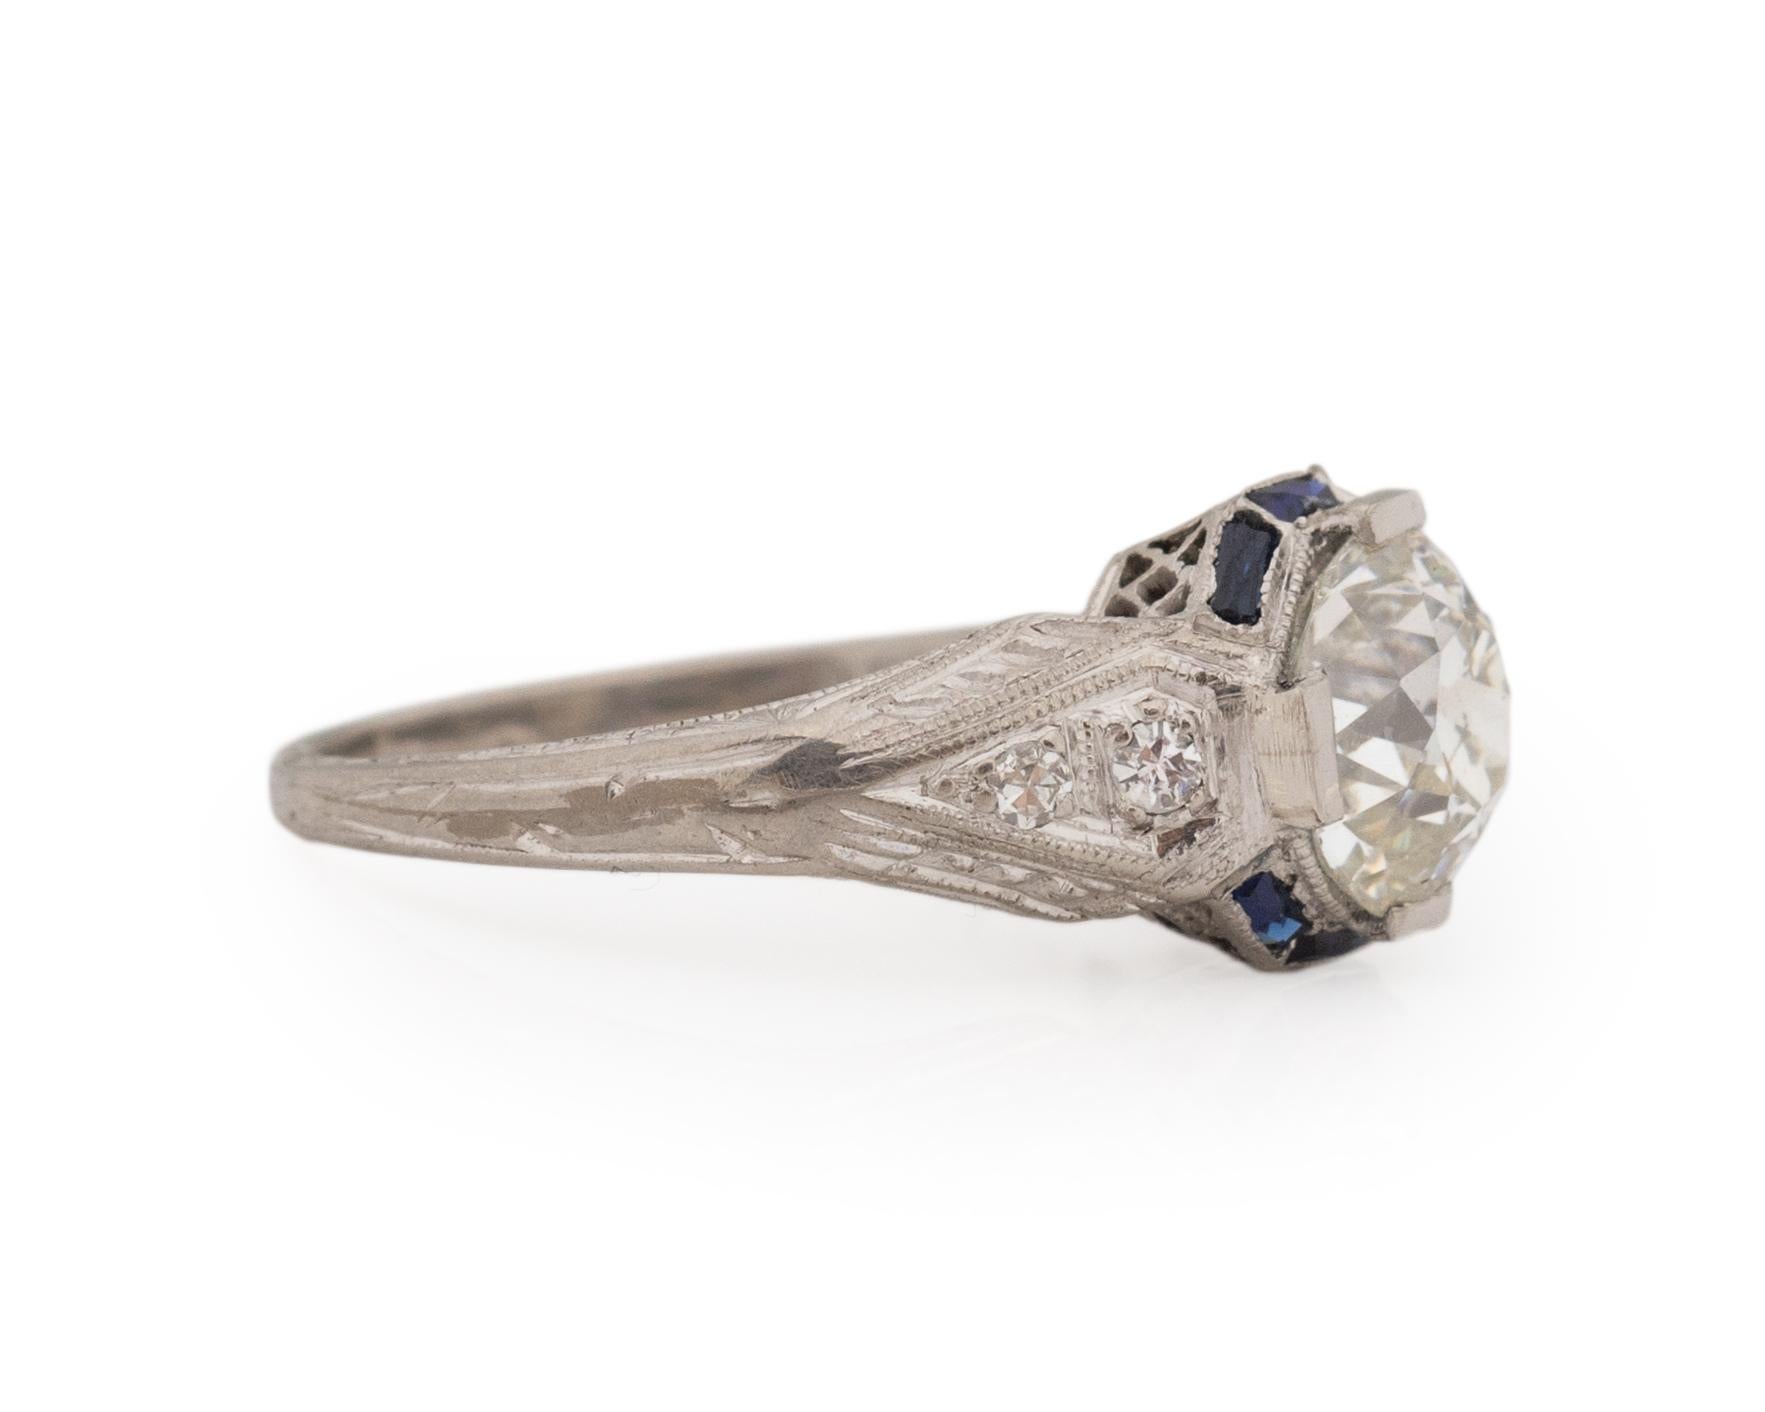 Ring Size: 4.5
Metal Type: Platinum [Hallmarked, and Tested]
Weight: 2.8 grams

Center Diamond Details:
GIA REPORT #: 5222174077
Weight: 1.33ct
Cut: Old European brilliant
Color: J
Clarity: VS2
Measurements: 6.90mm x 6.80mm x 4.47mm

Side Stone